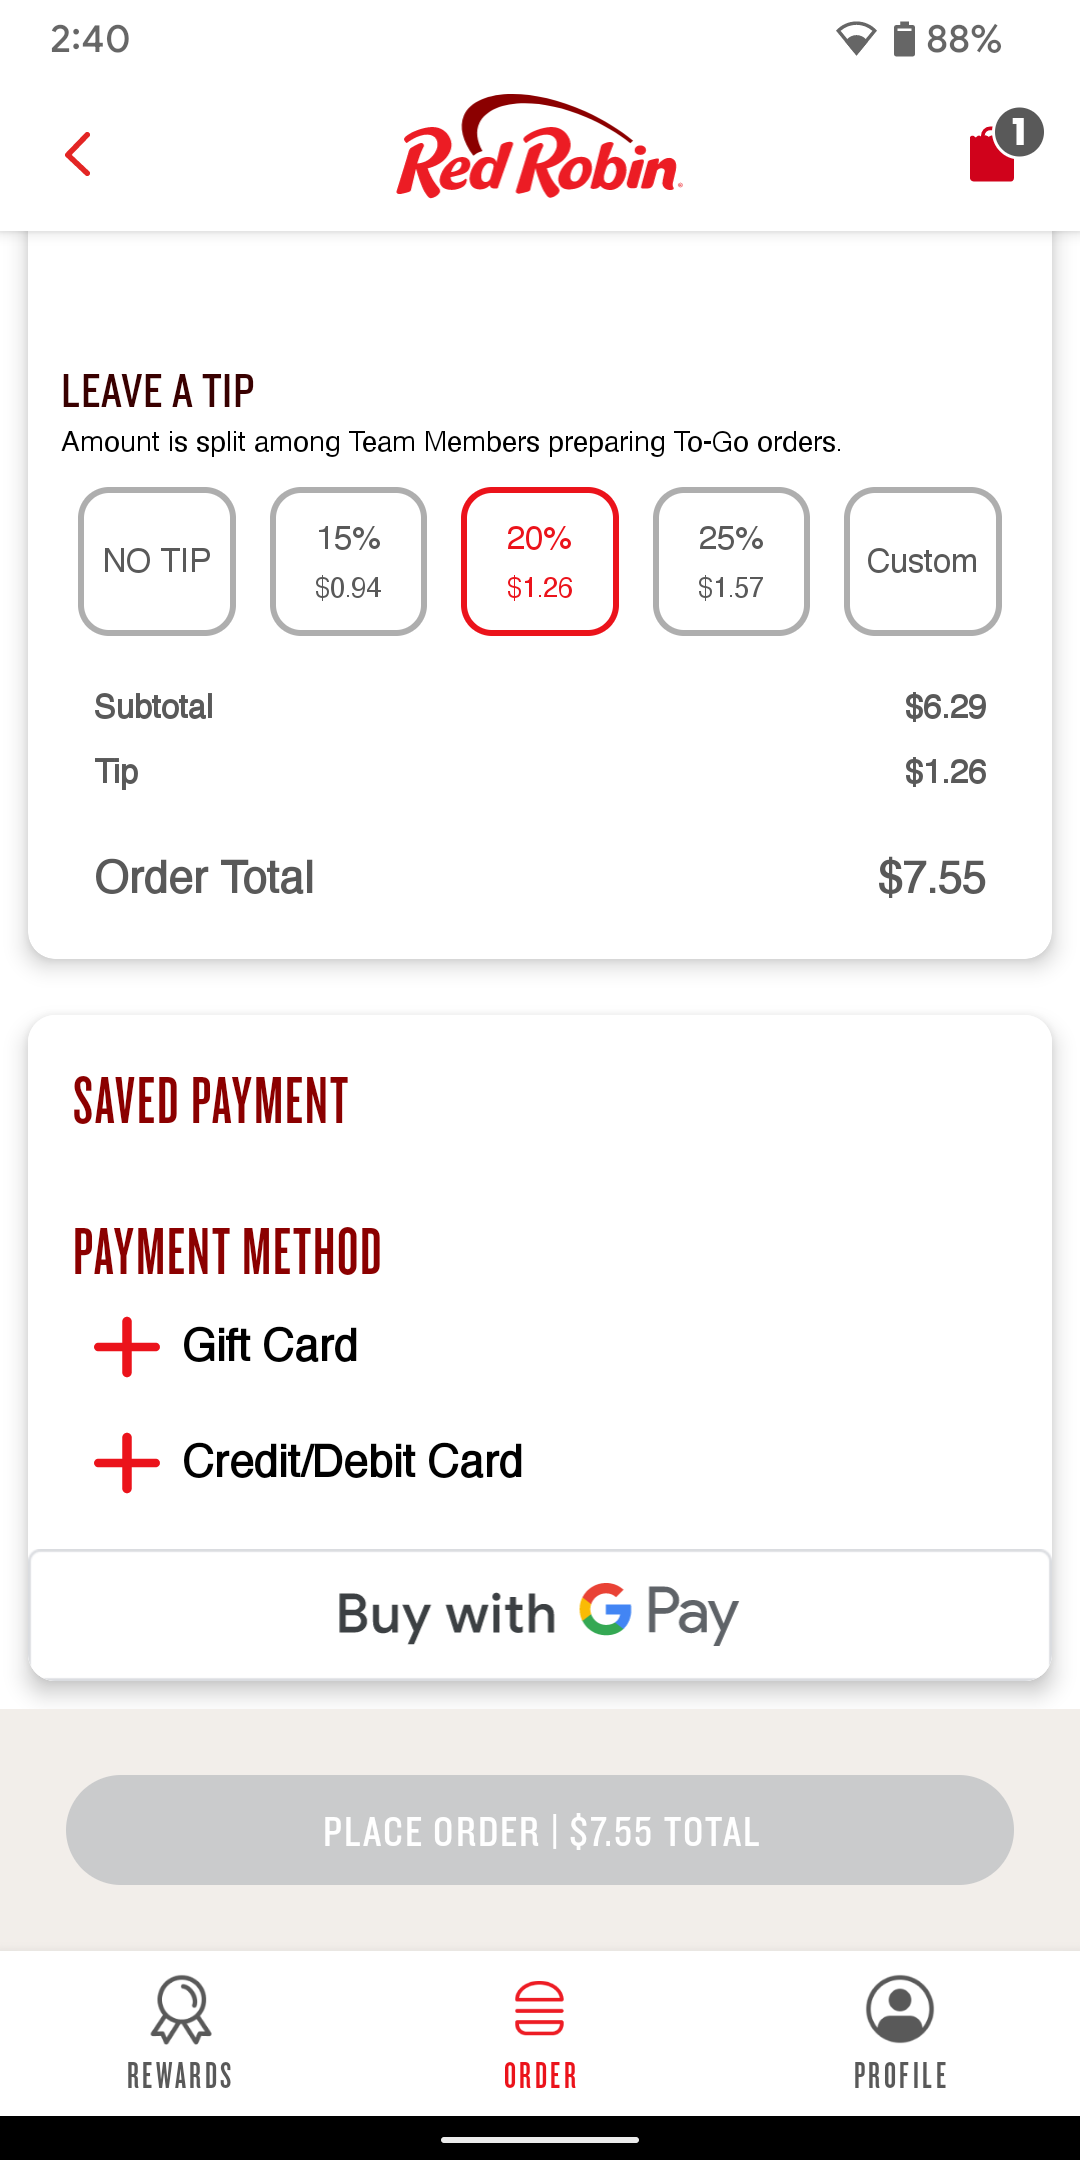 Red Robin accepts Google Pay in its Android app.